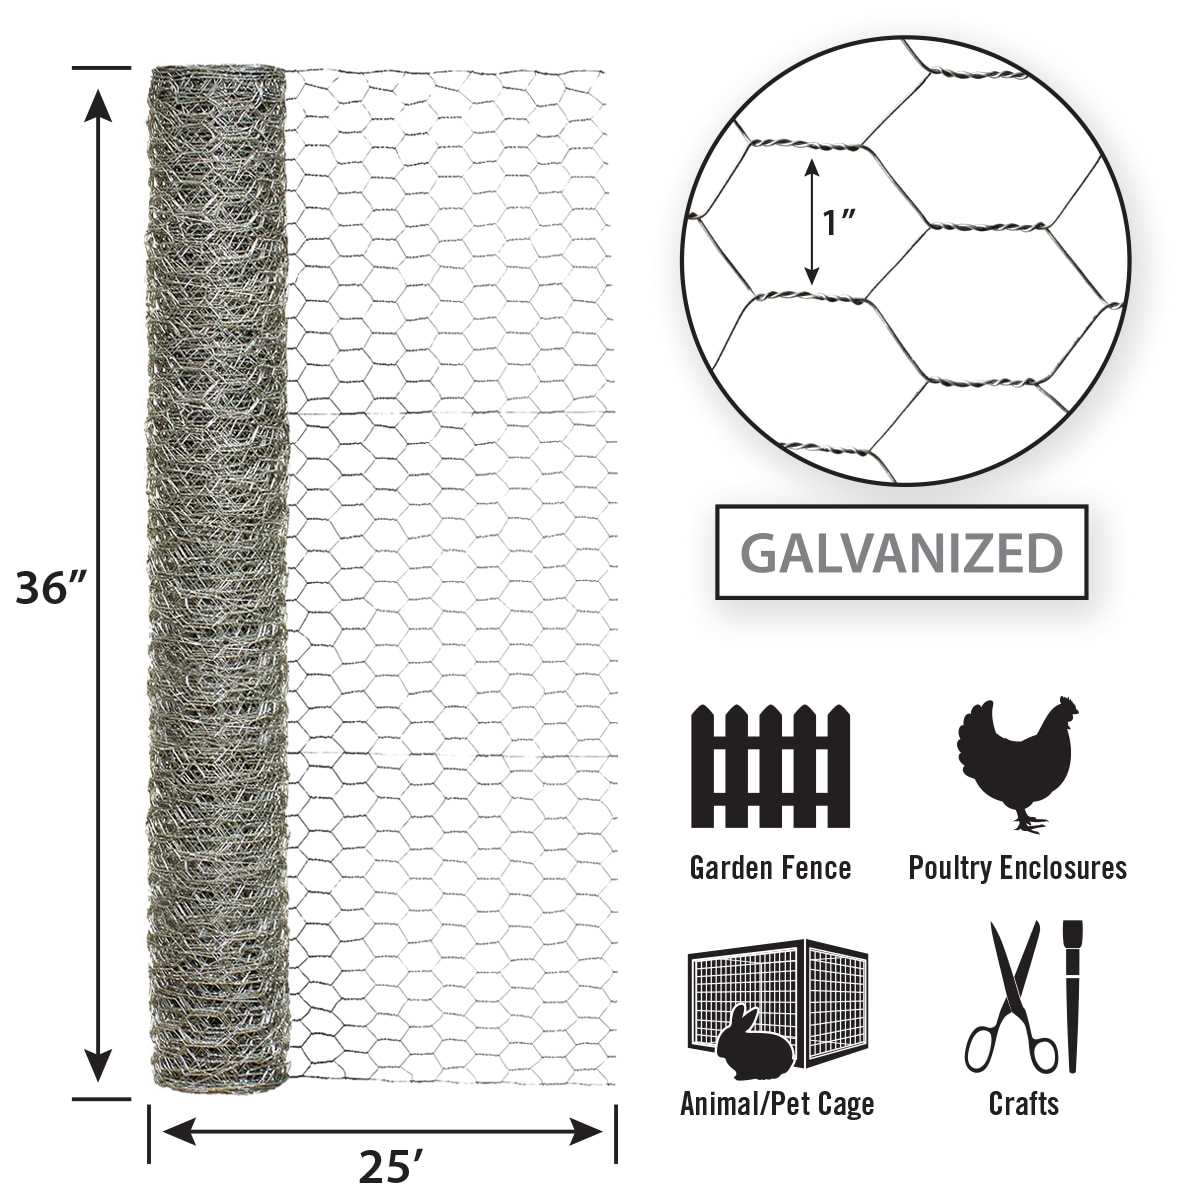 Chicken Wire Mesh Protects Gardens From Pests